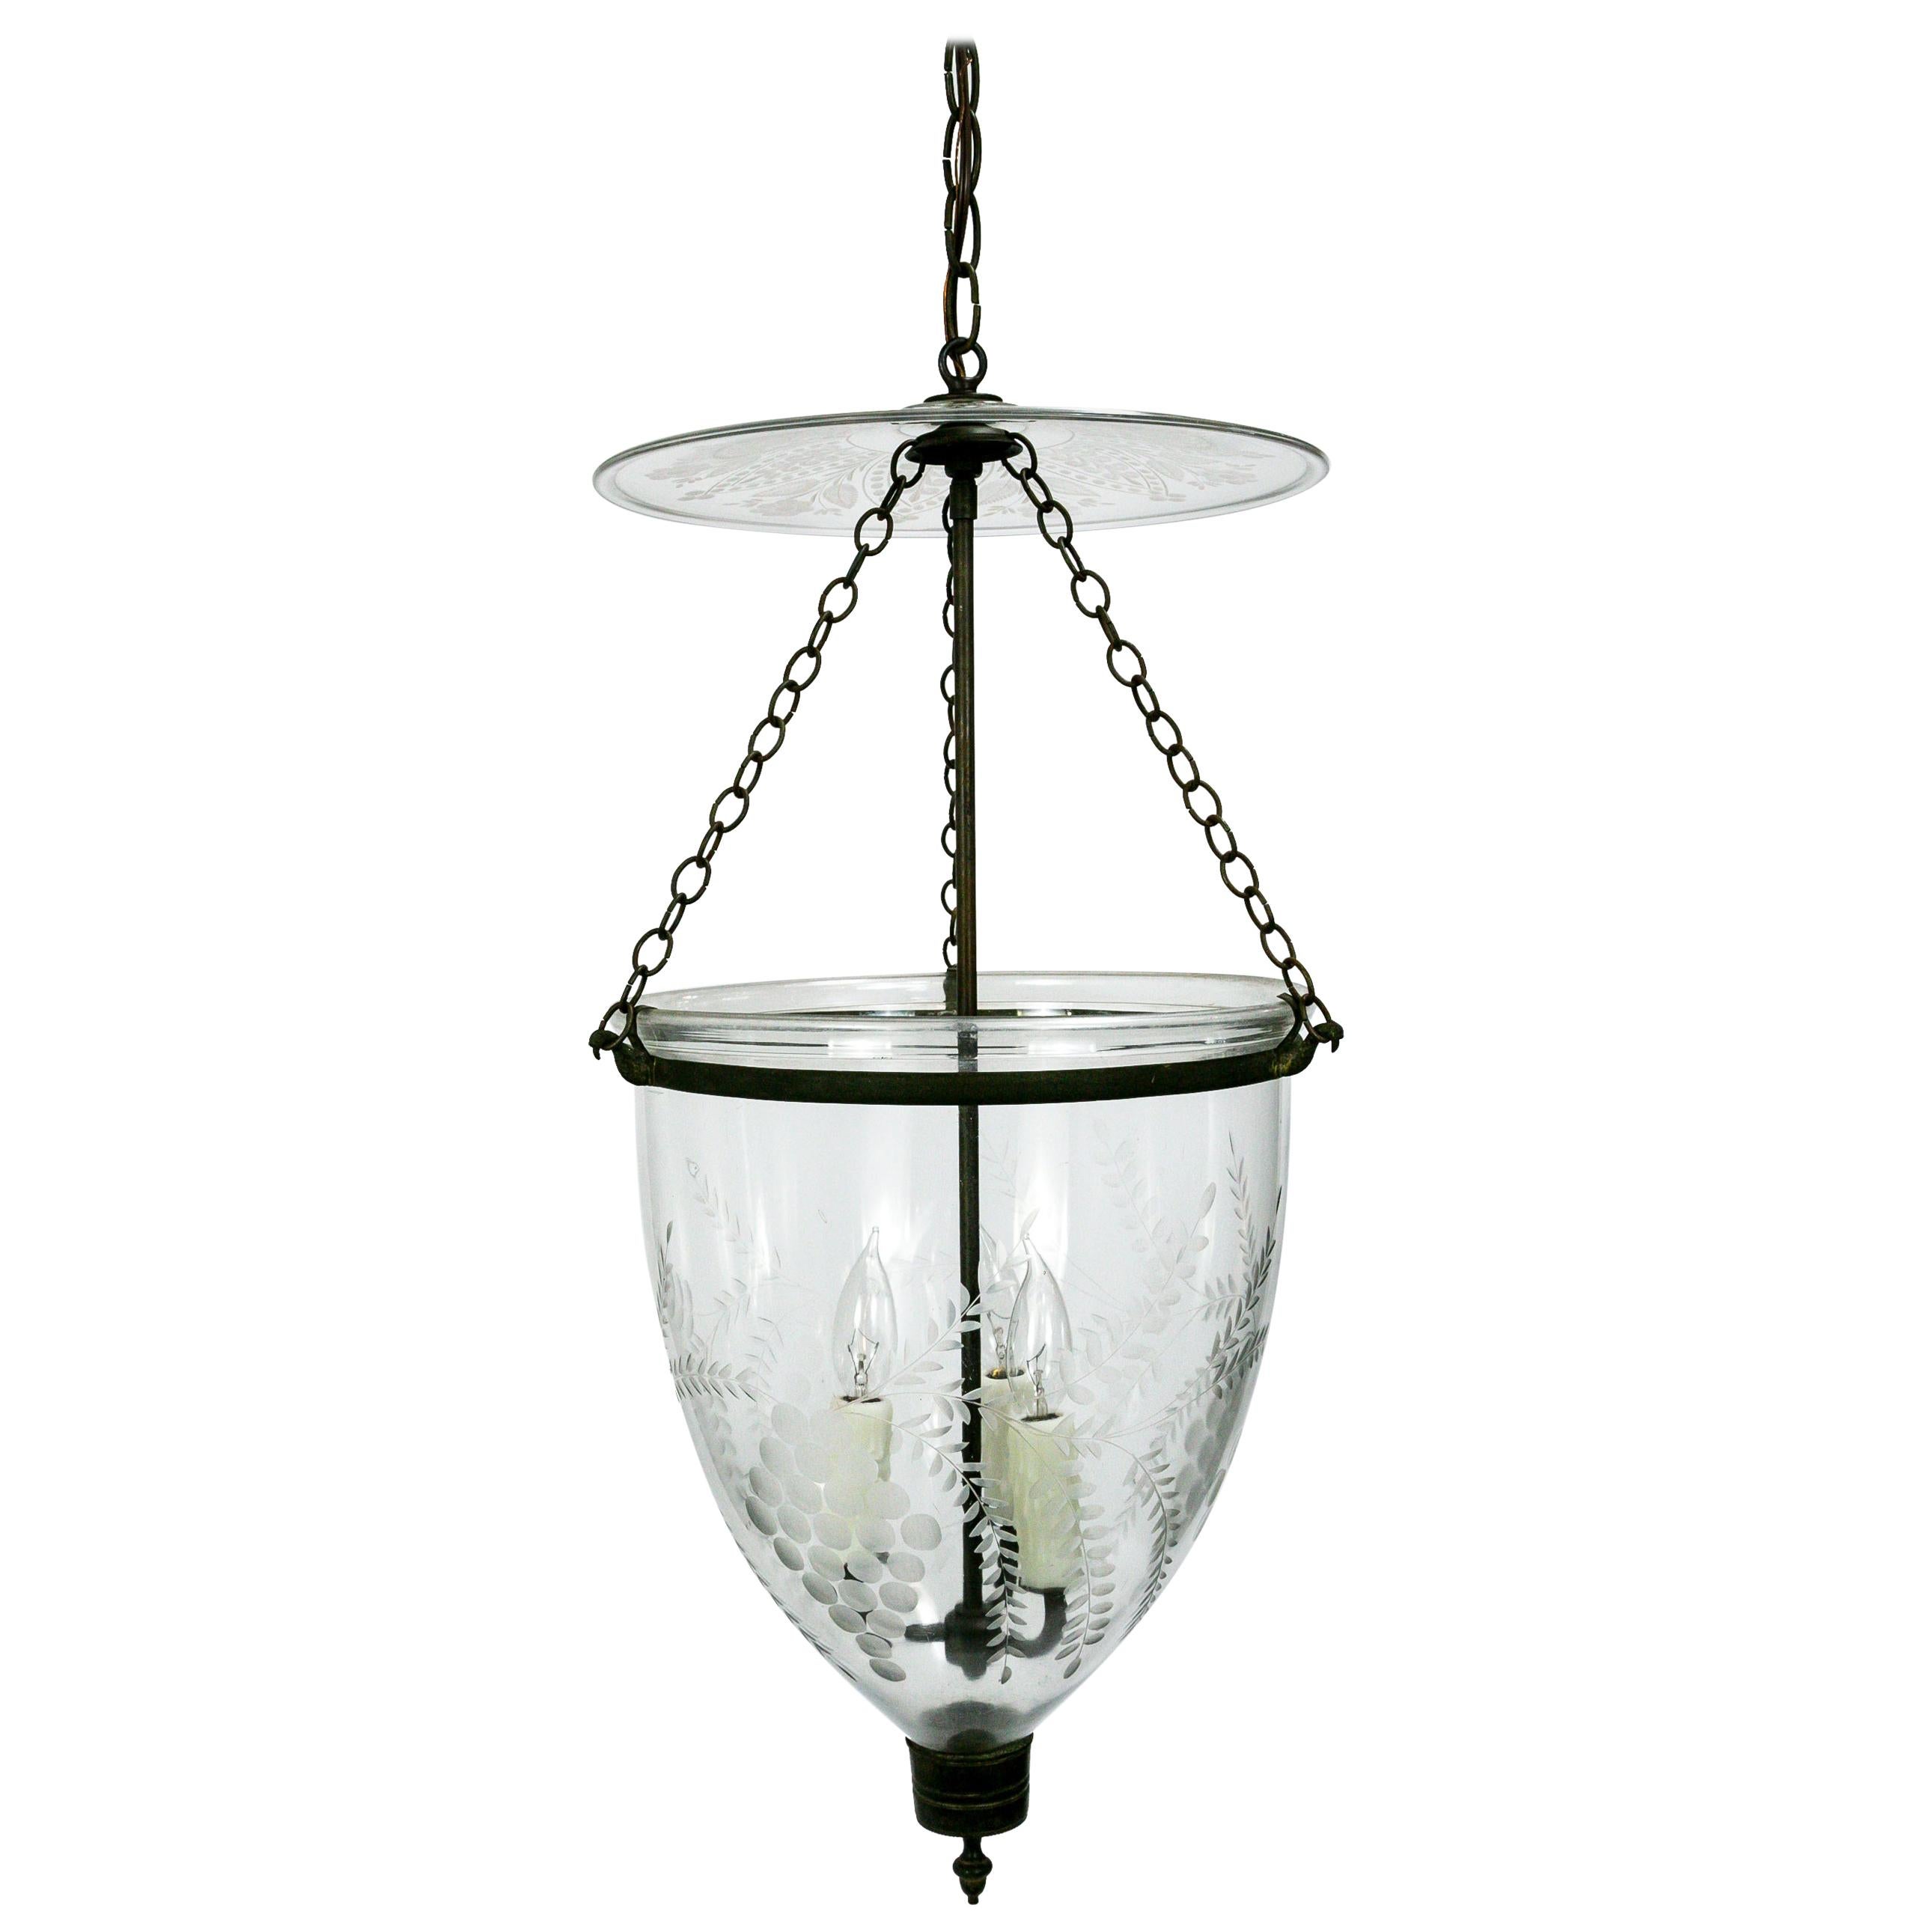 19th Century Georgian Style Bell Jar with Etched Grapes